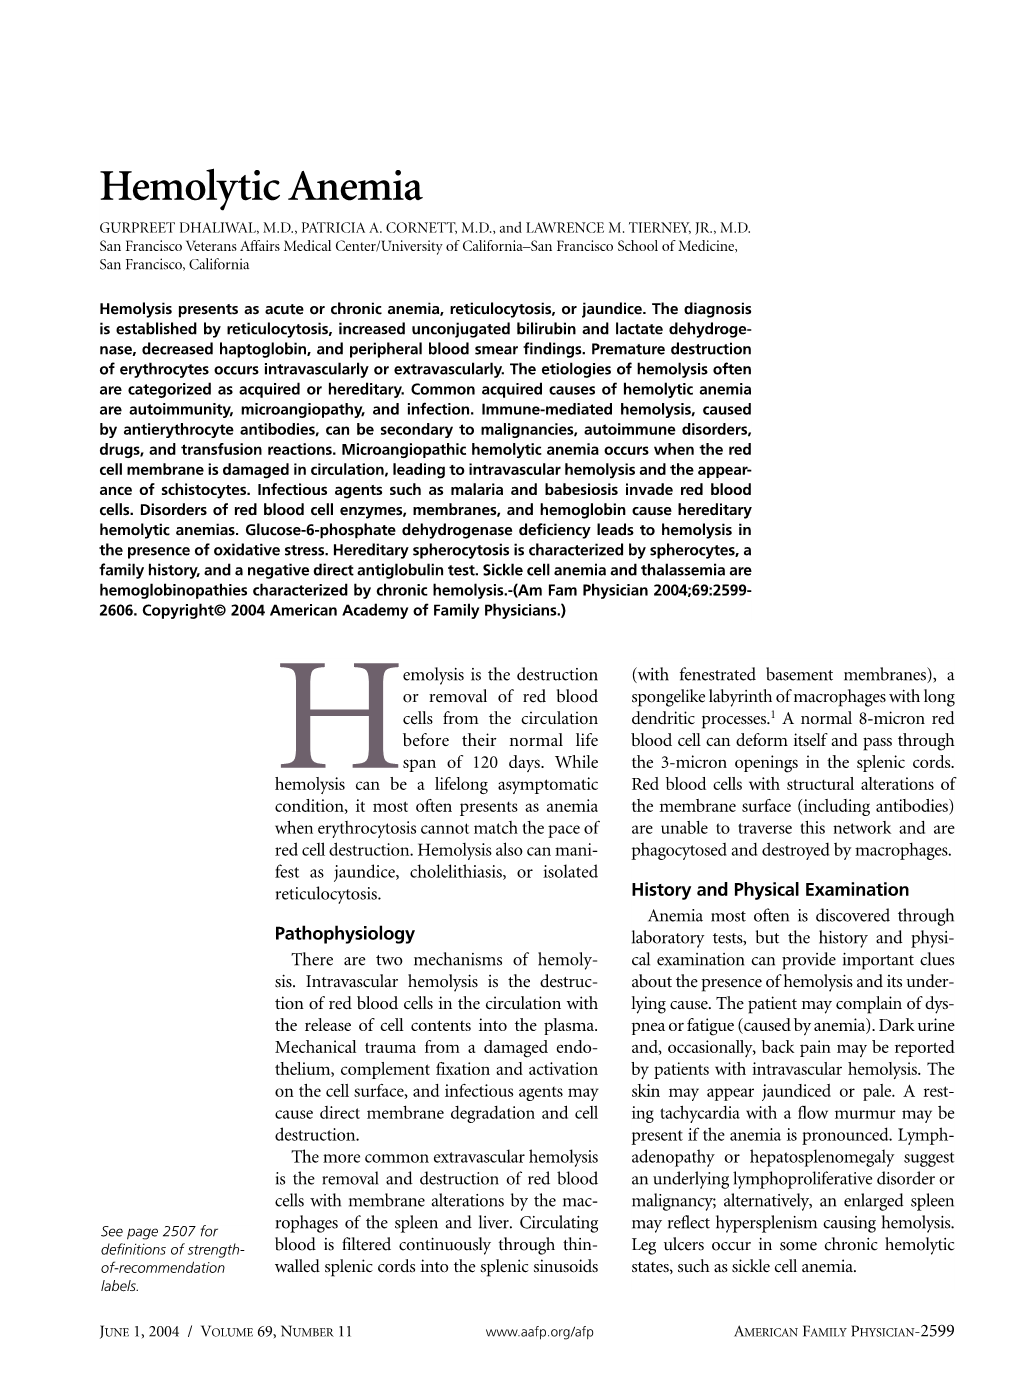 2004 Concise Review Dx Hemolytic Anemia.Pdf